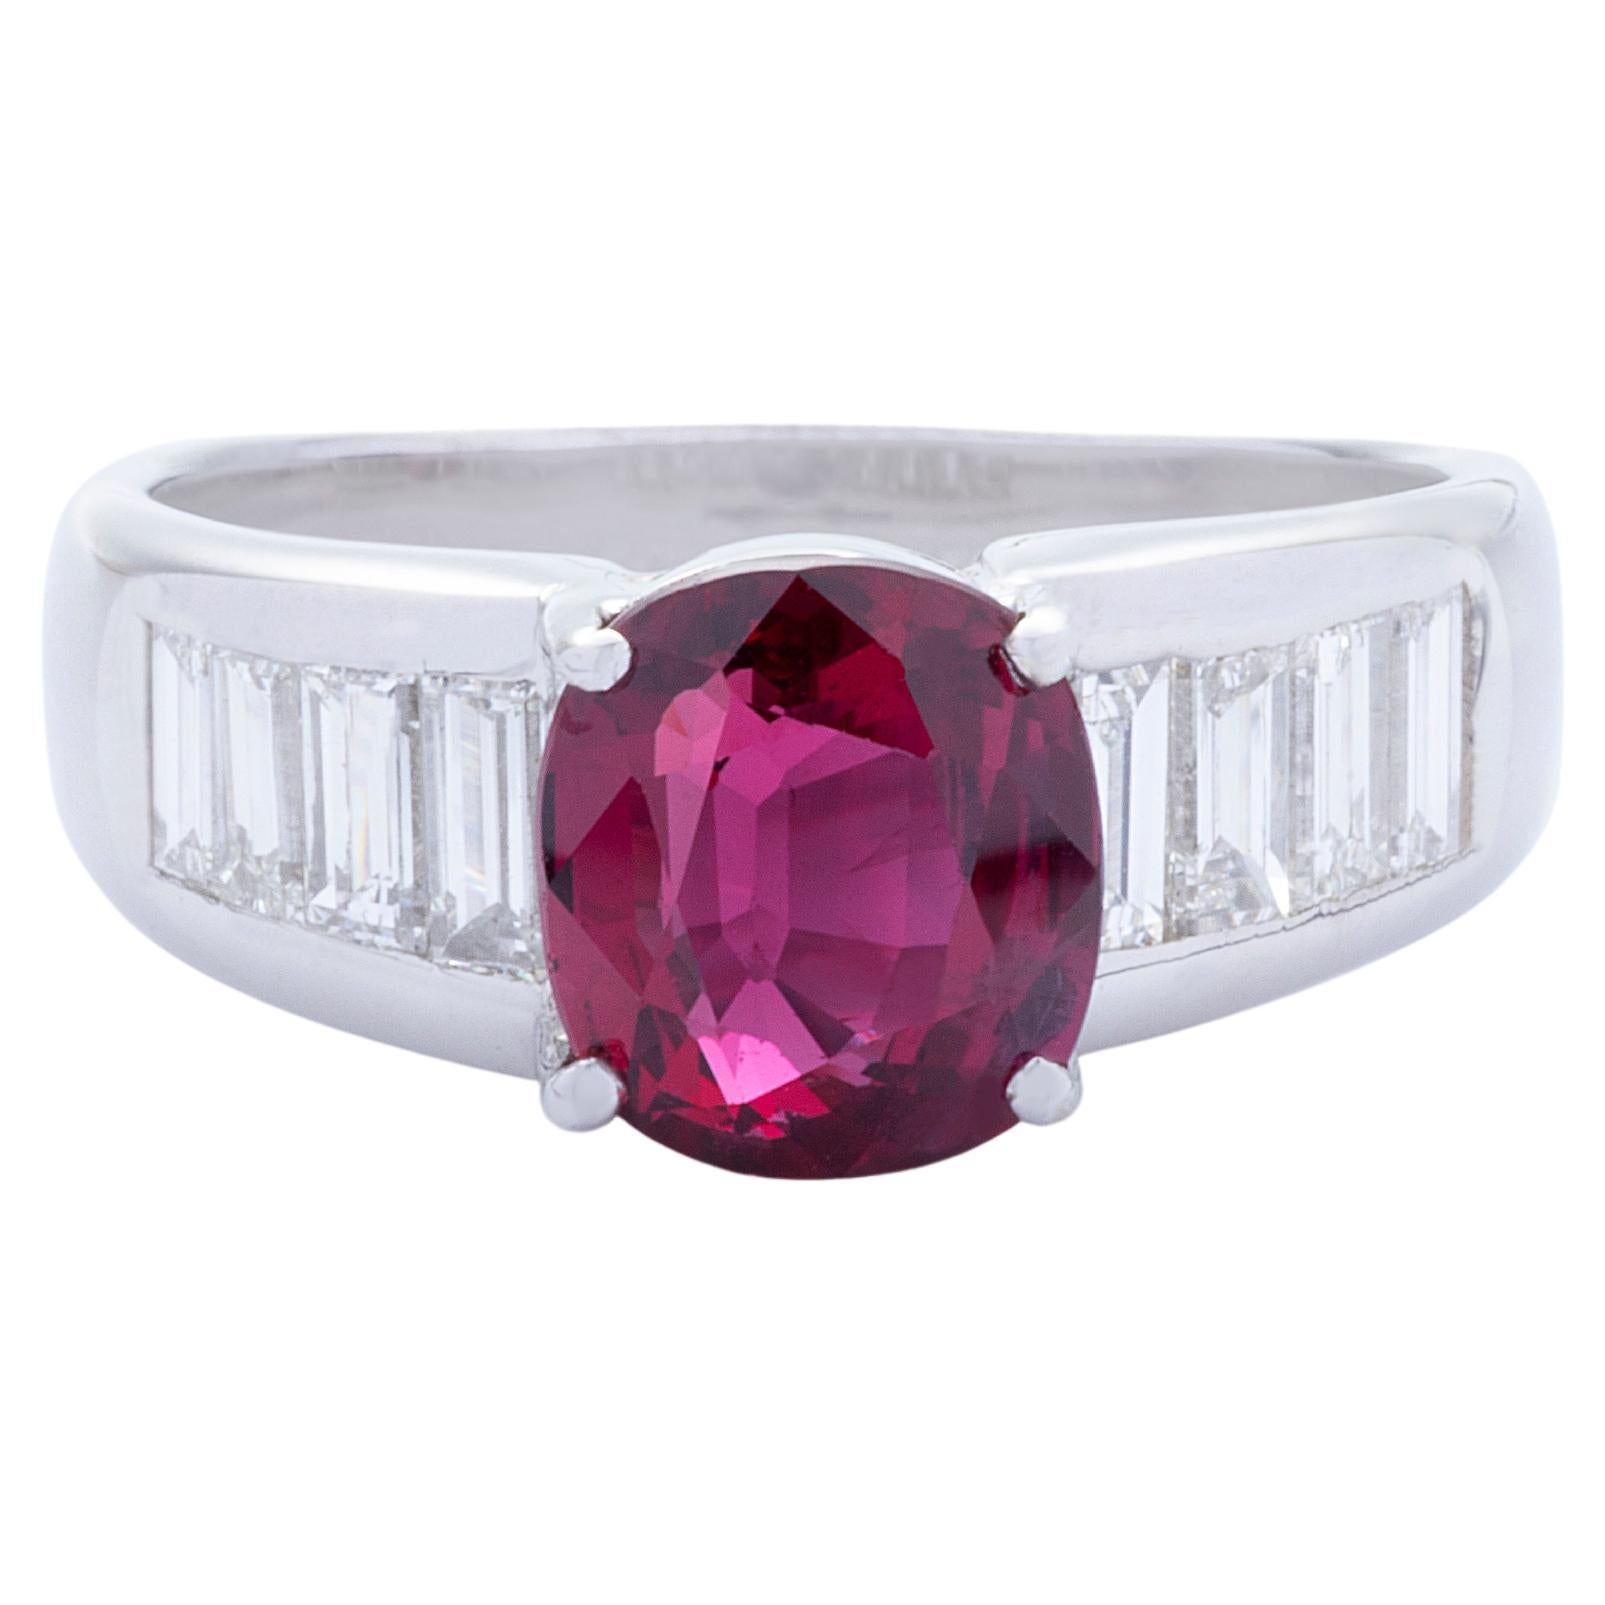 GRS 3.21 Carat Siam Ruby & 0.55ct Baguette Diamond 18k White Gold Cocktail Ring